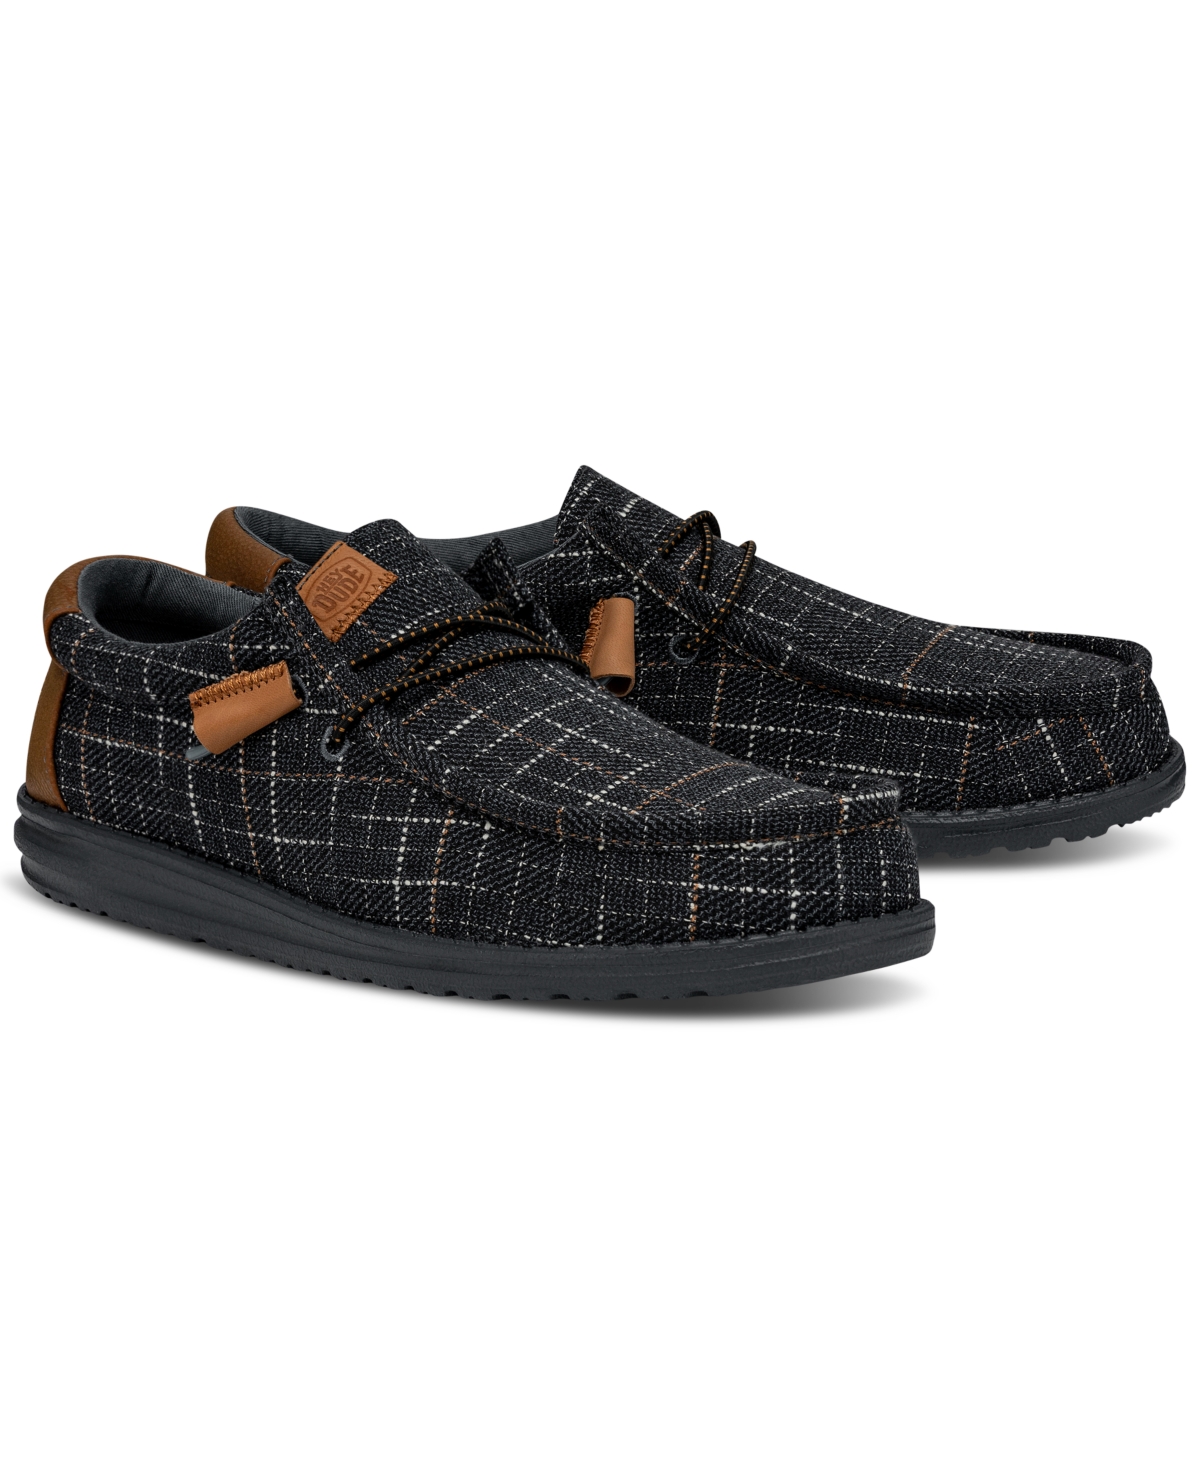 Men's Wally Plaid Canvas Casual Moccasin Sneakers from Finish Line - Navy